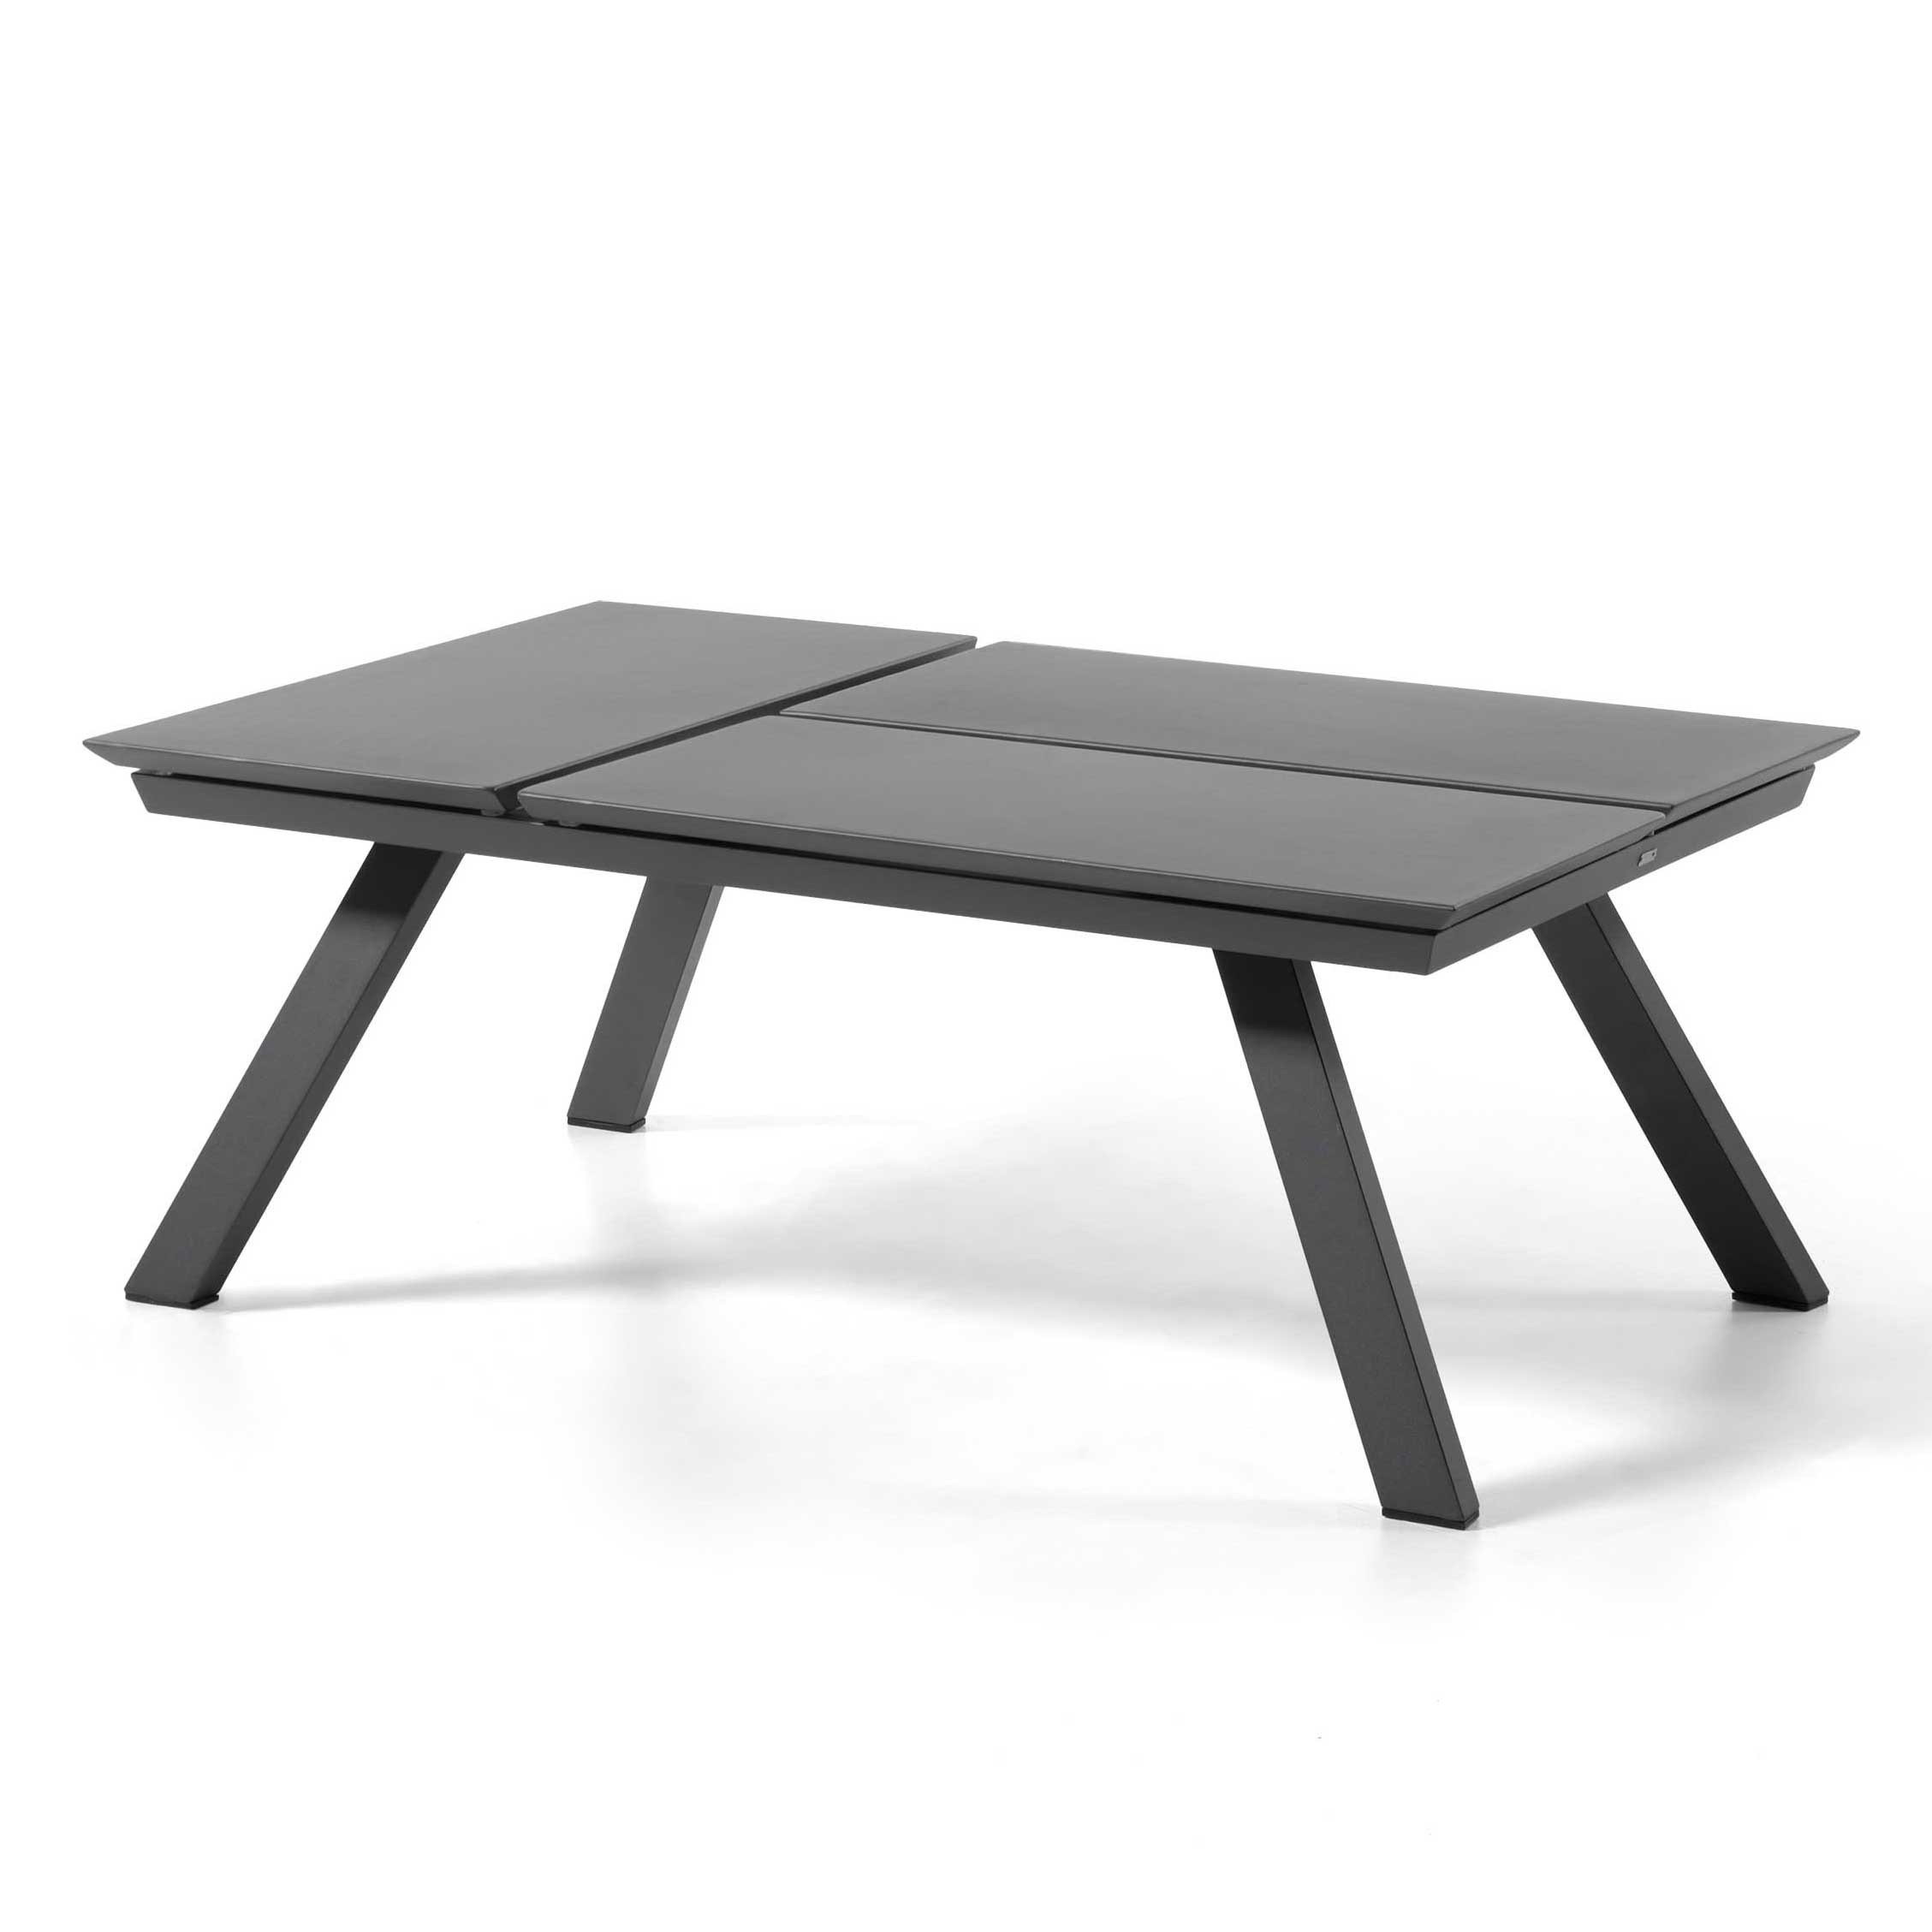 Table basse relevable gris anthracite